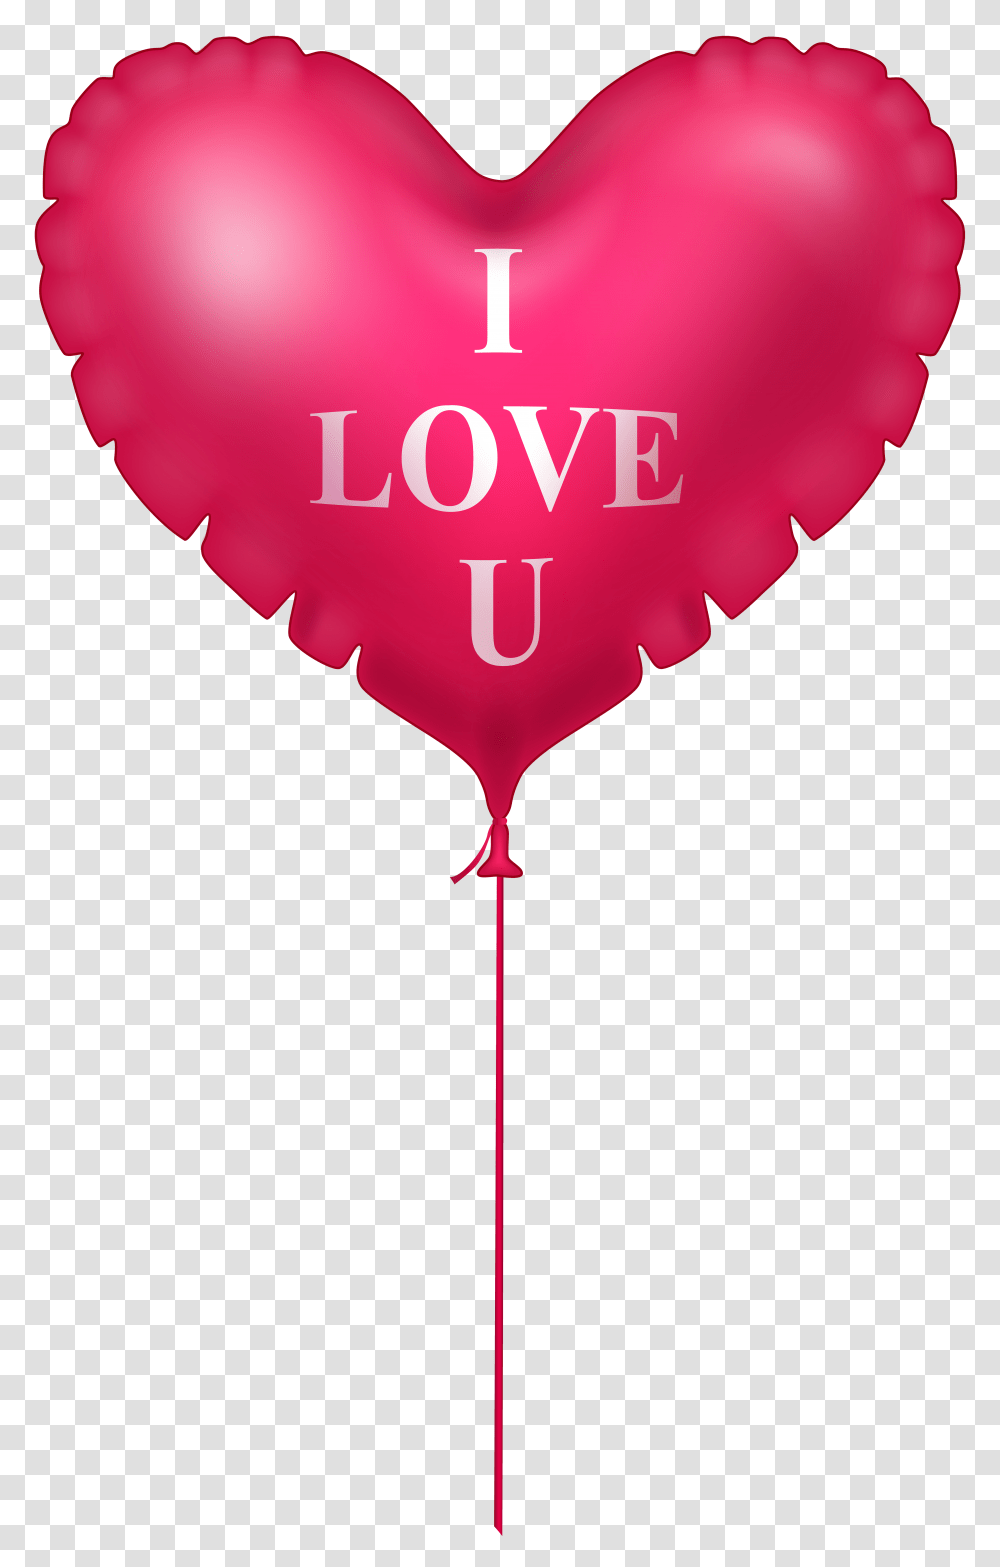 I Love You Pink Heart Balloon, Cross, Sign Transparent Png